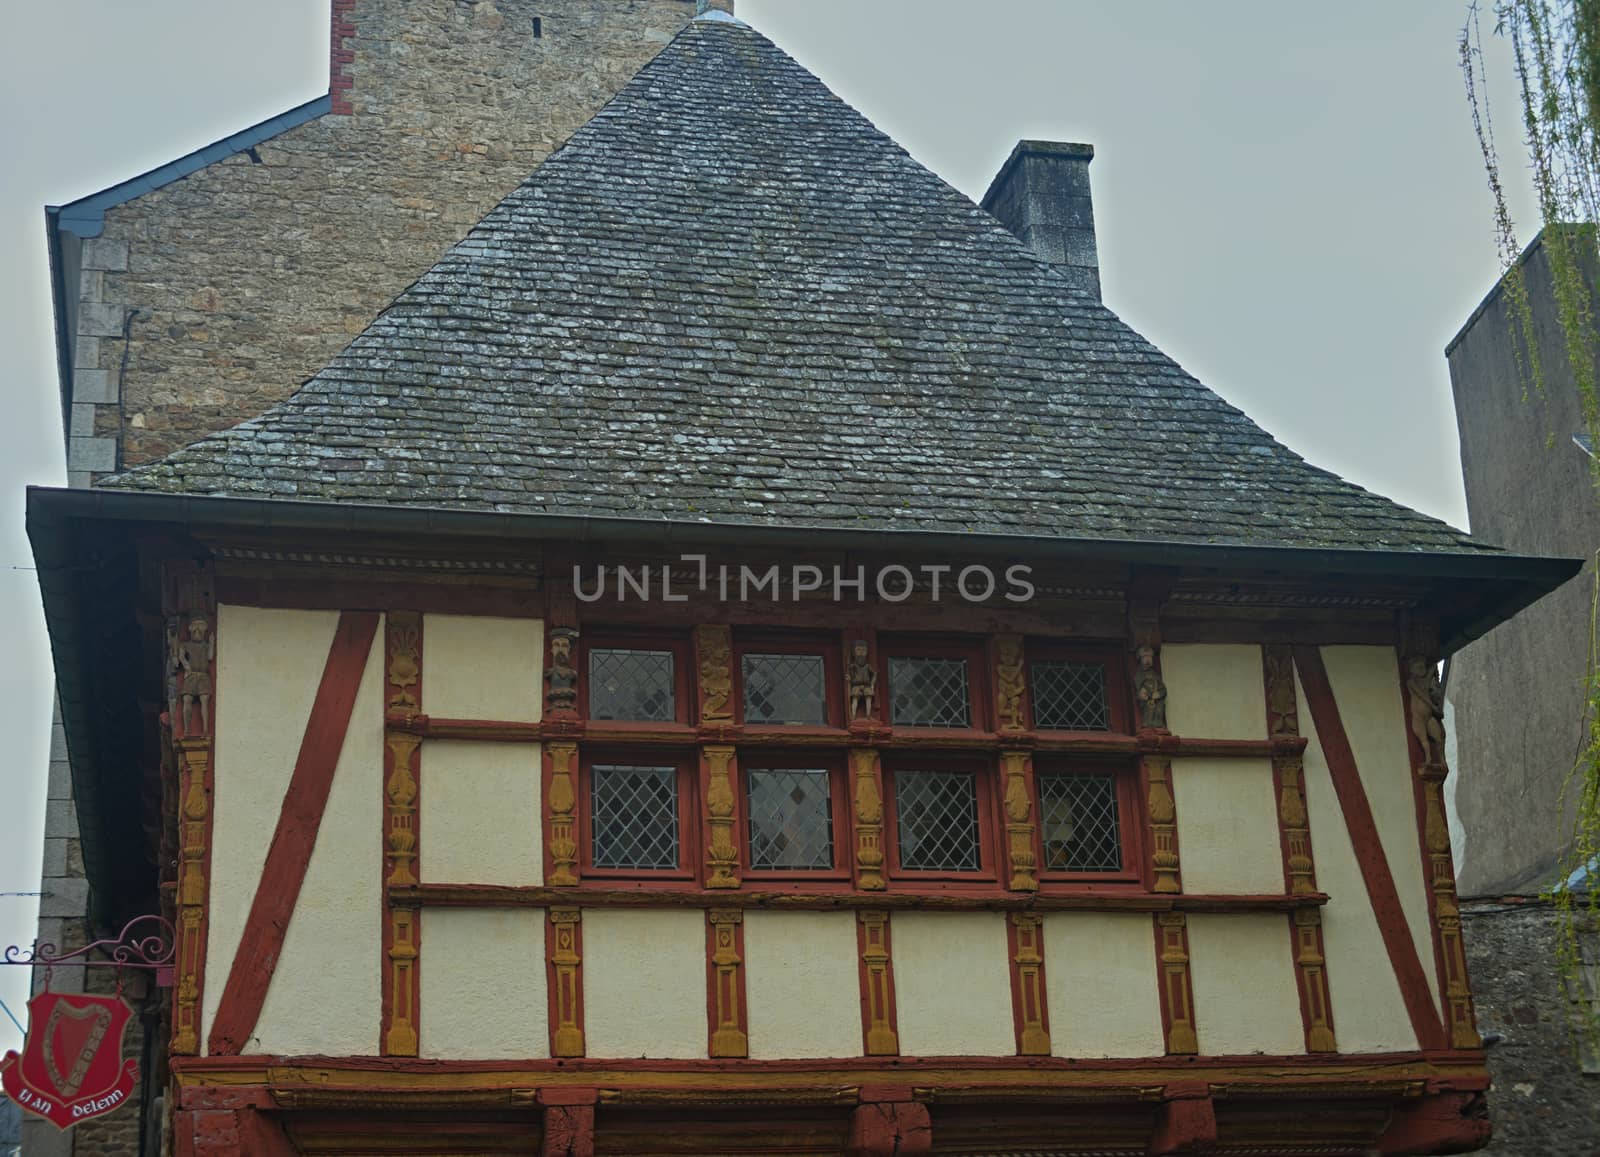 DINAN, FRANCE - April 7th 2019 - Upper floor on old medieval house by sheriffkule